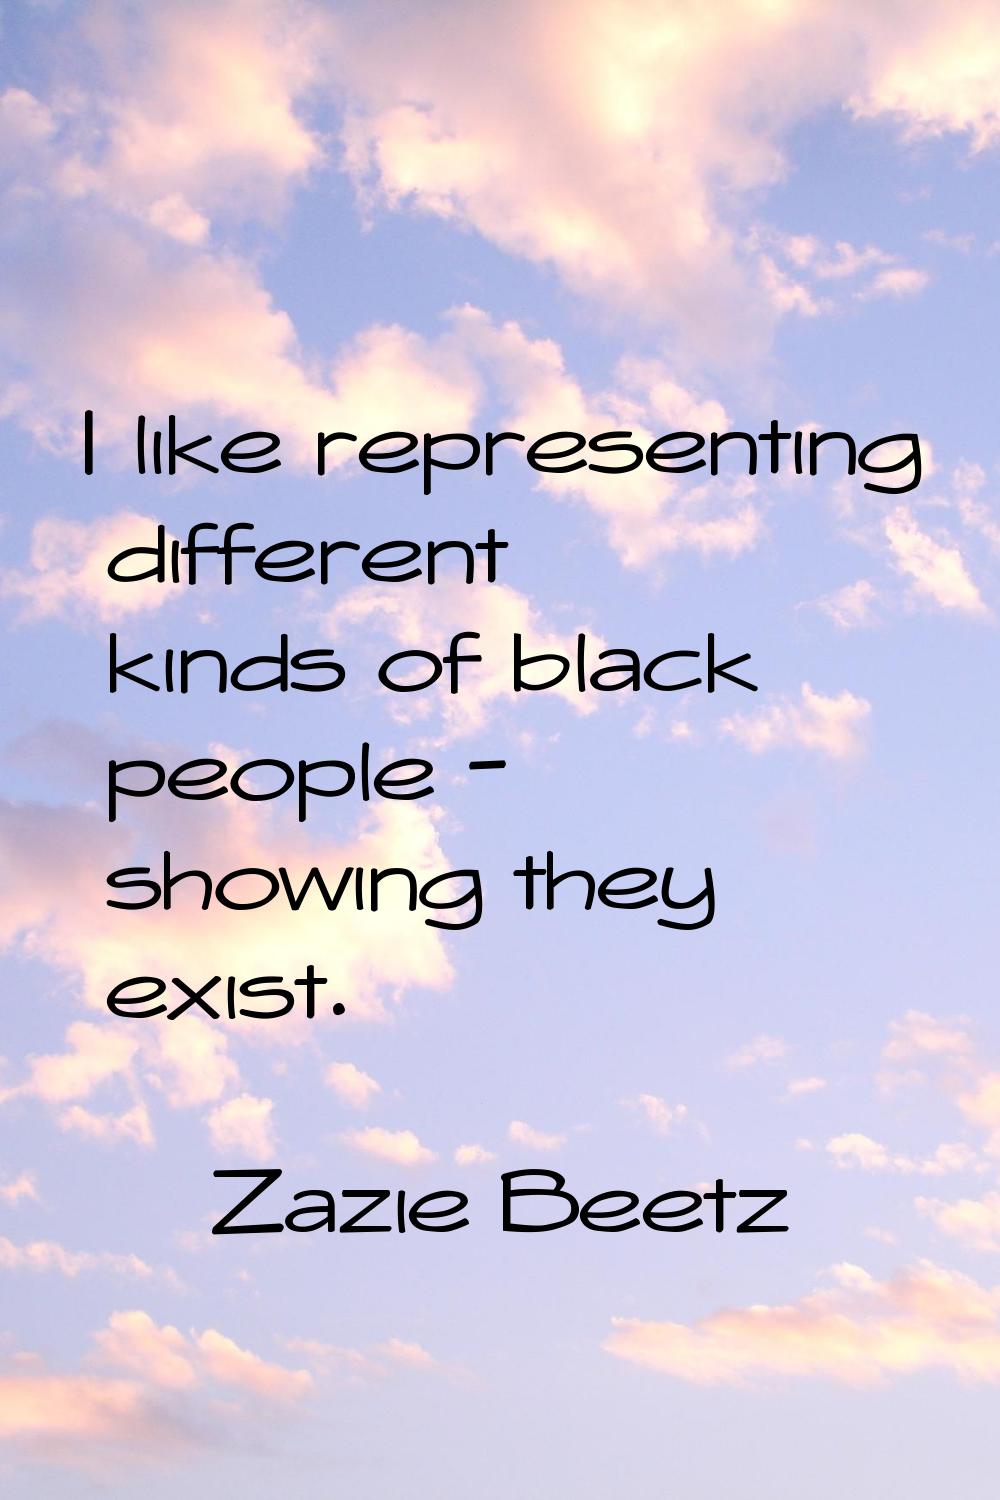 I like representing different kinds of black people - showing they exist.